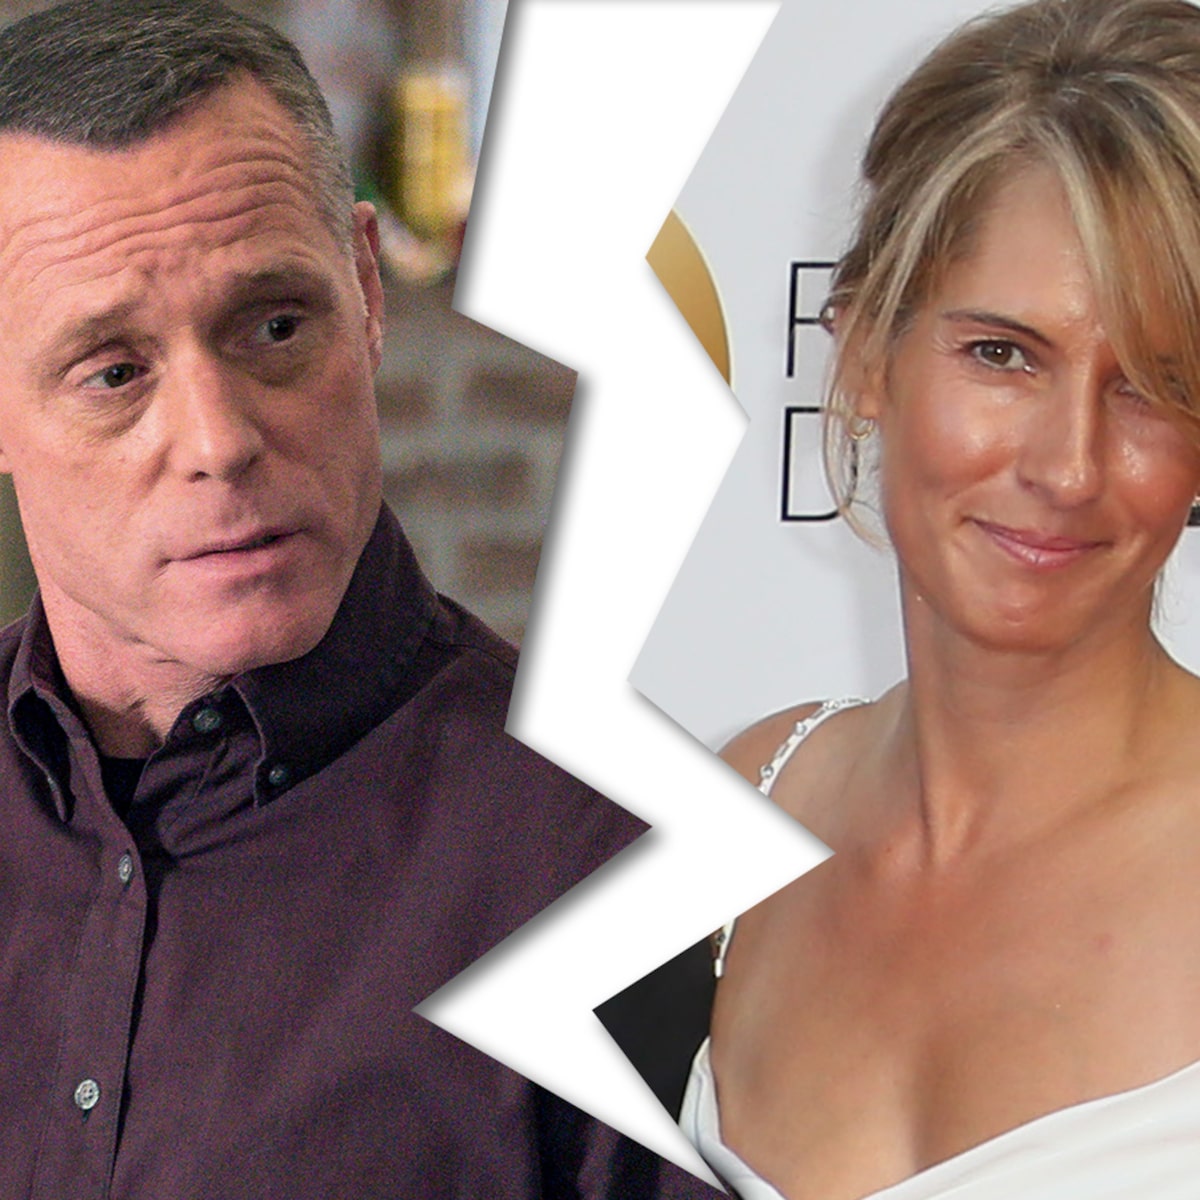 Angie Janu Divorcee Of Jason Beghe. Jason filed for divorce in 2017 and their divorce was finalized in 2020. 